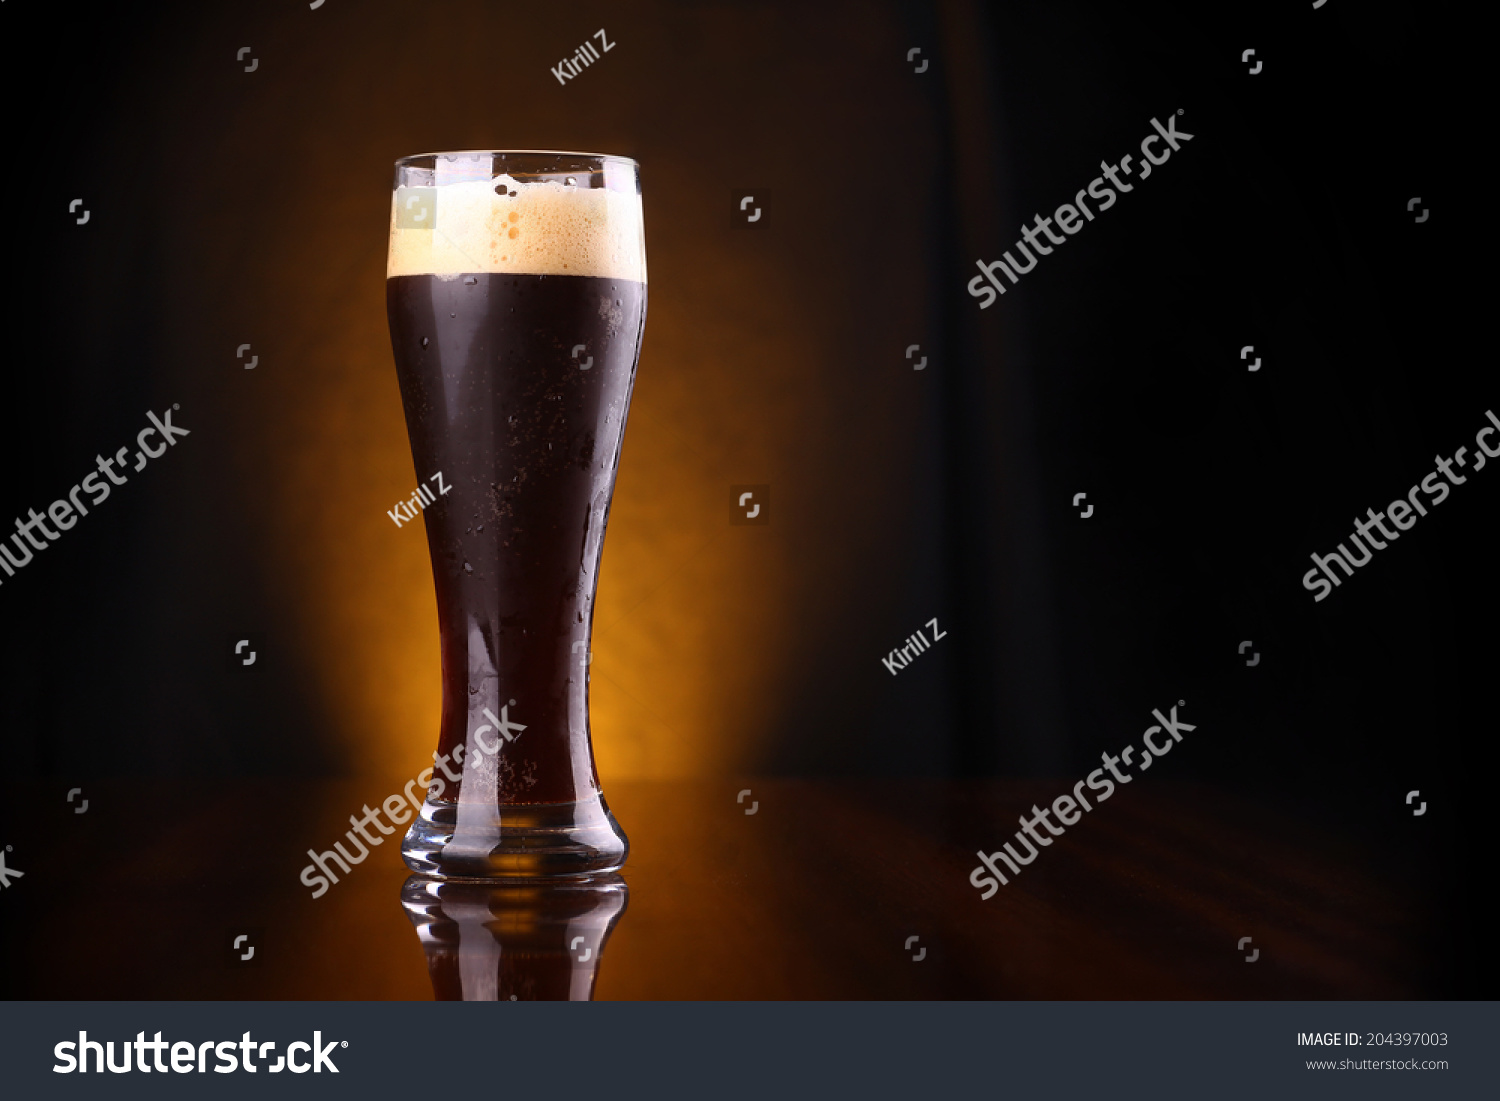 Tall glass of dark beer over a dark background lit yellow #204397003